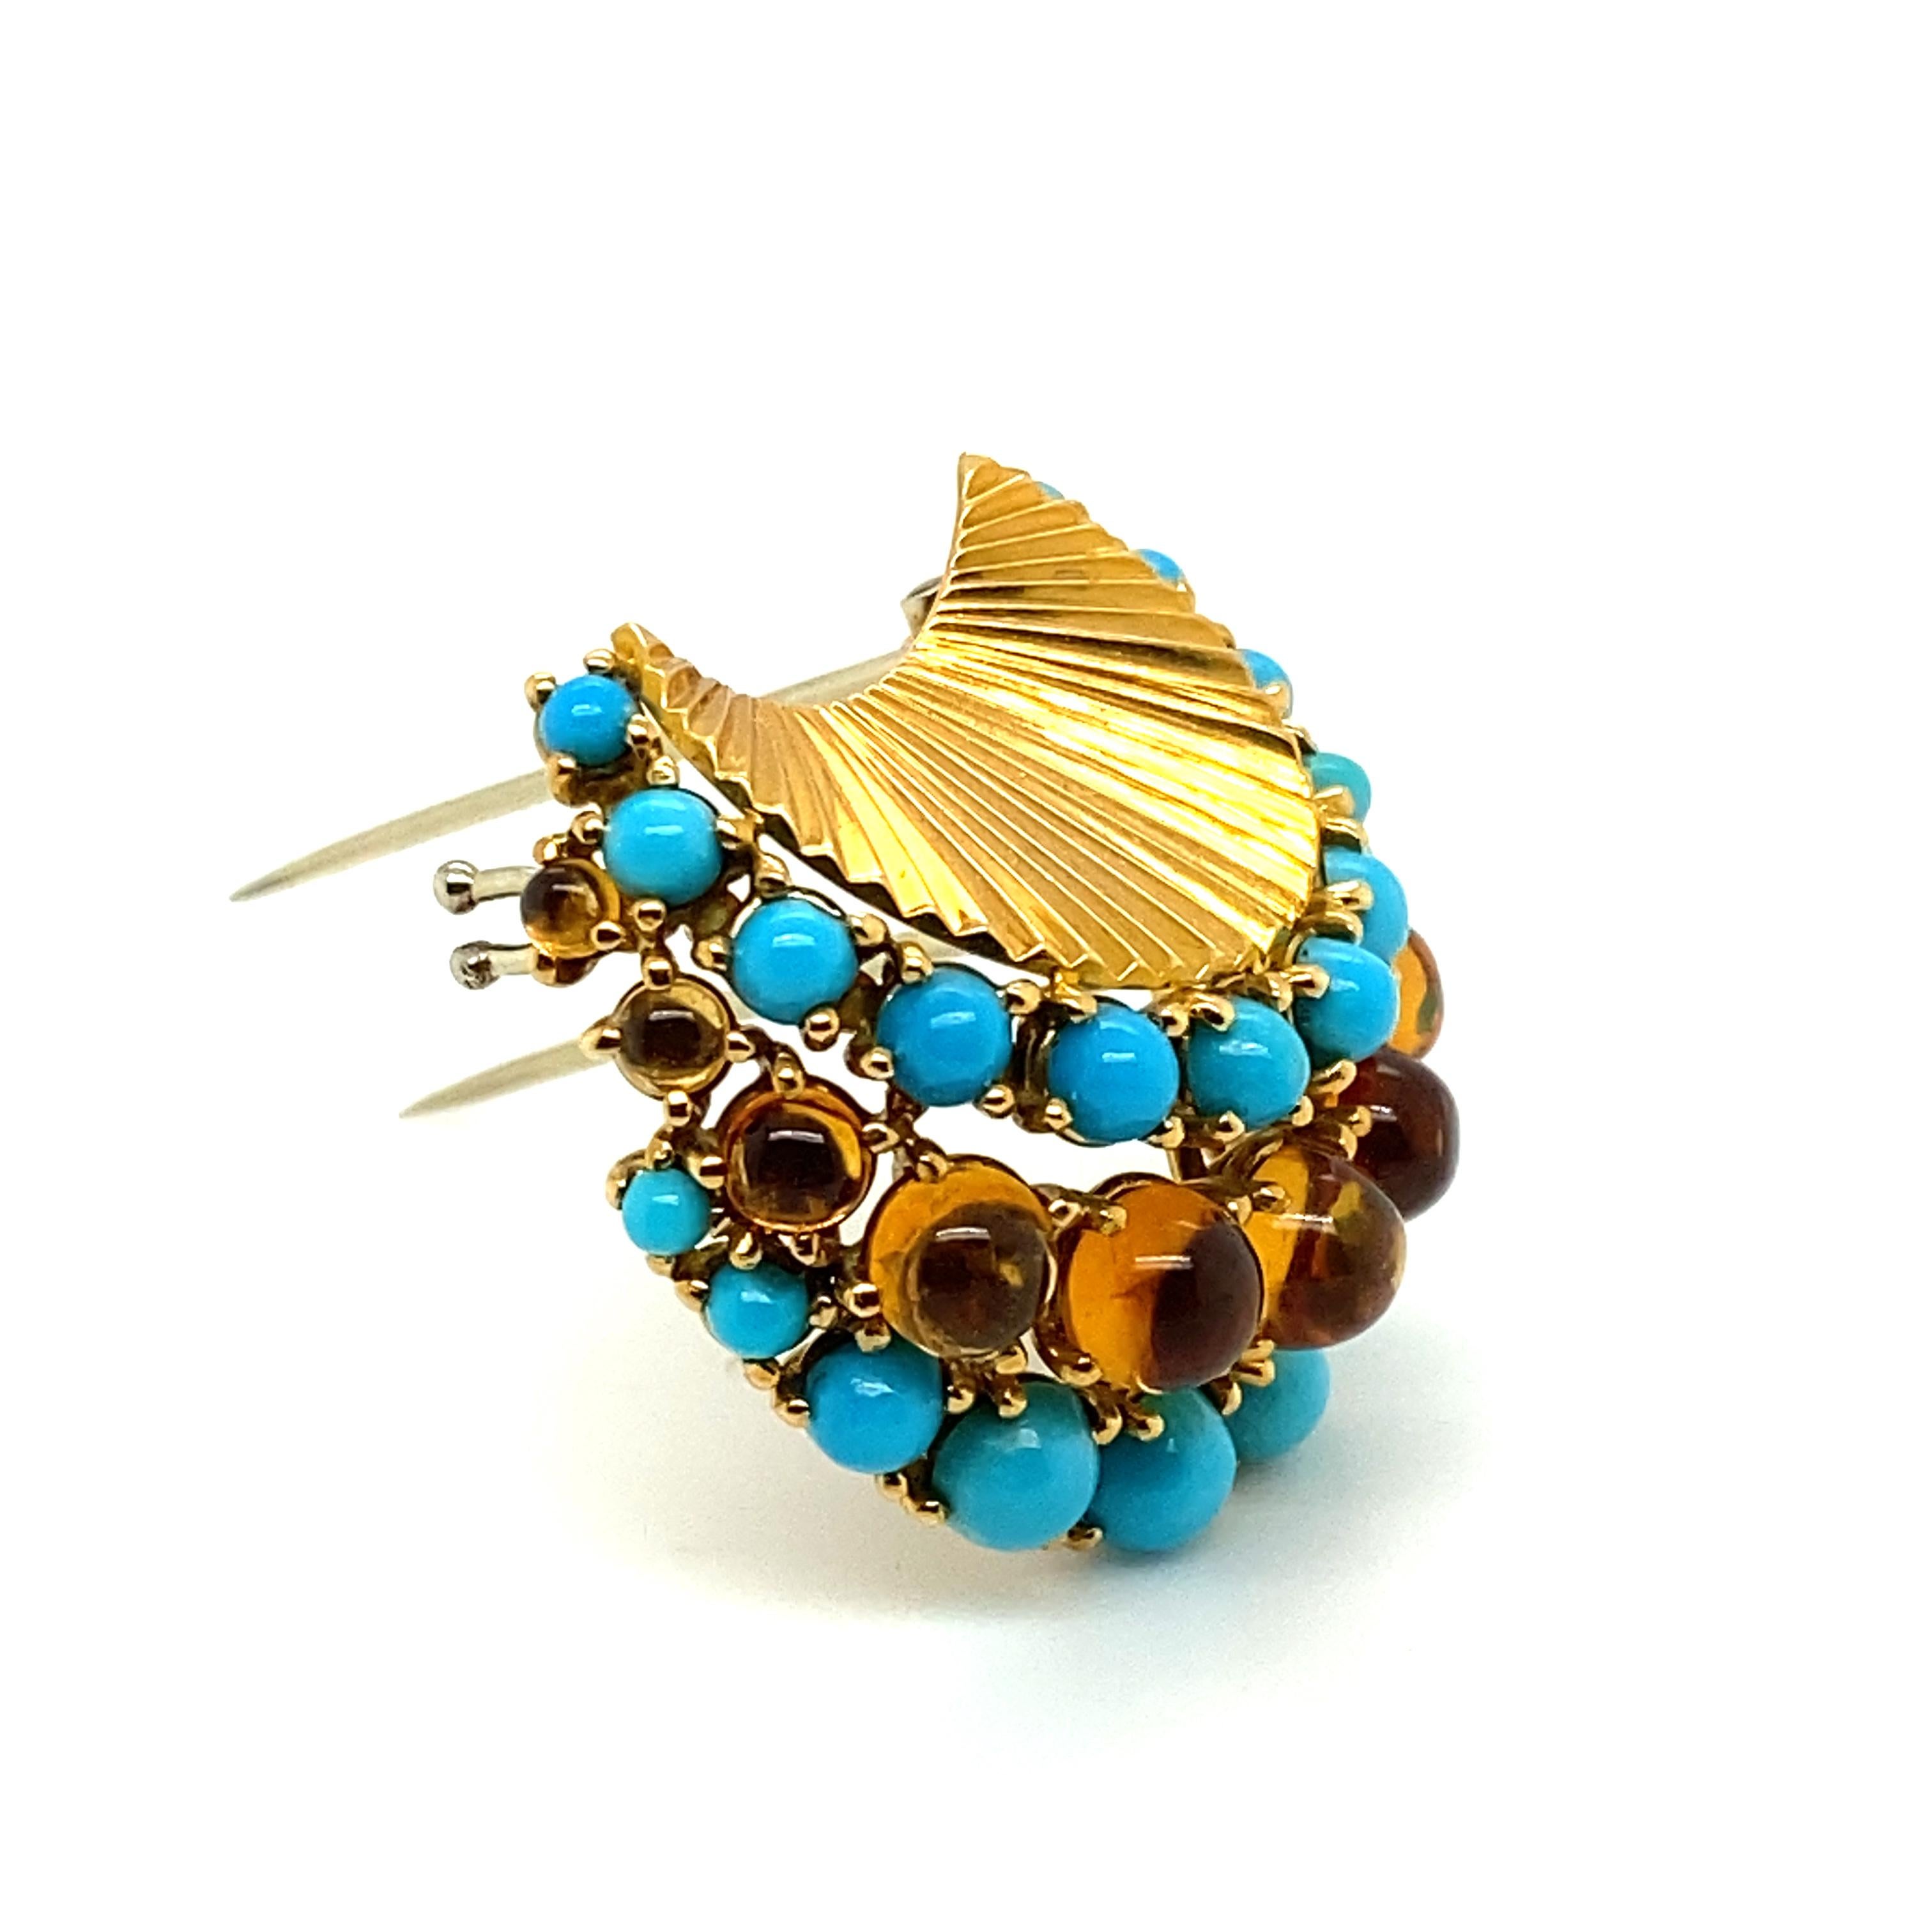 Cabochon Gübelin Retro Brooch in 18 Karat Yellow Gold with Turquoises and Citrines For Sale